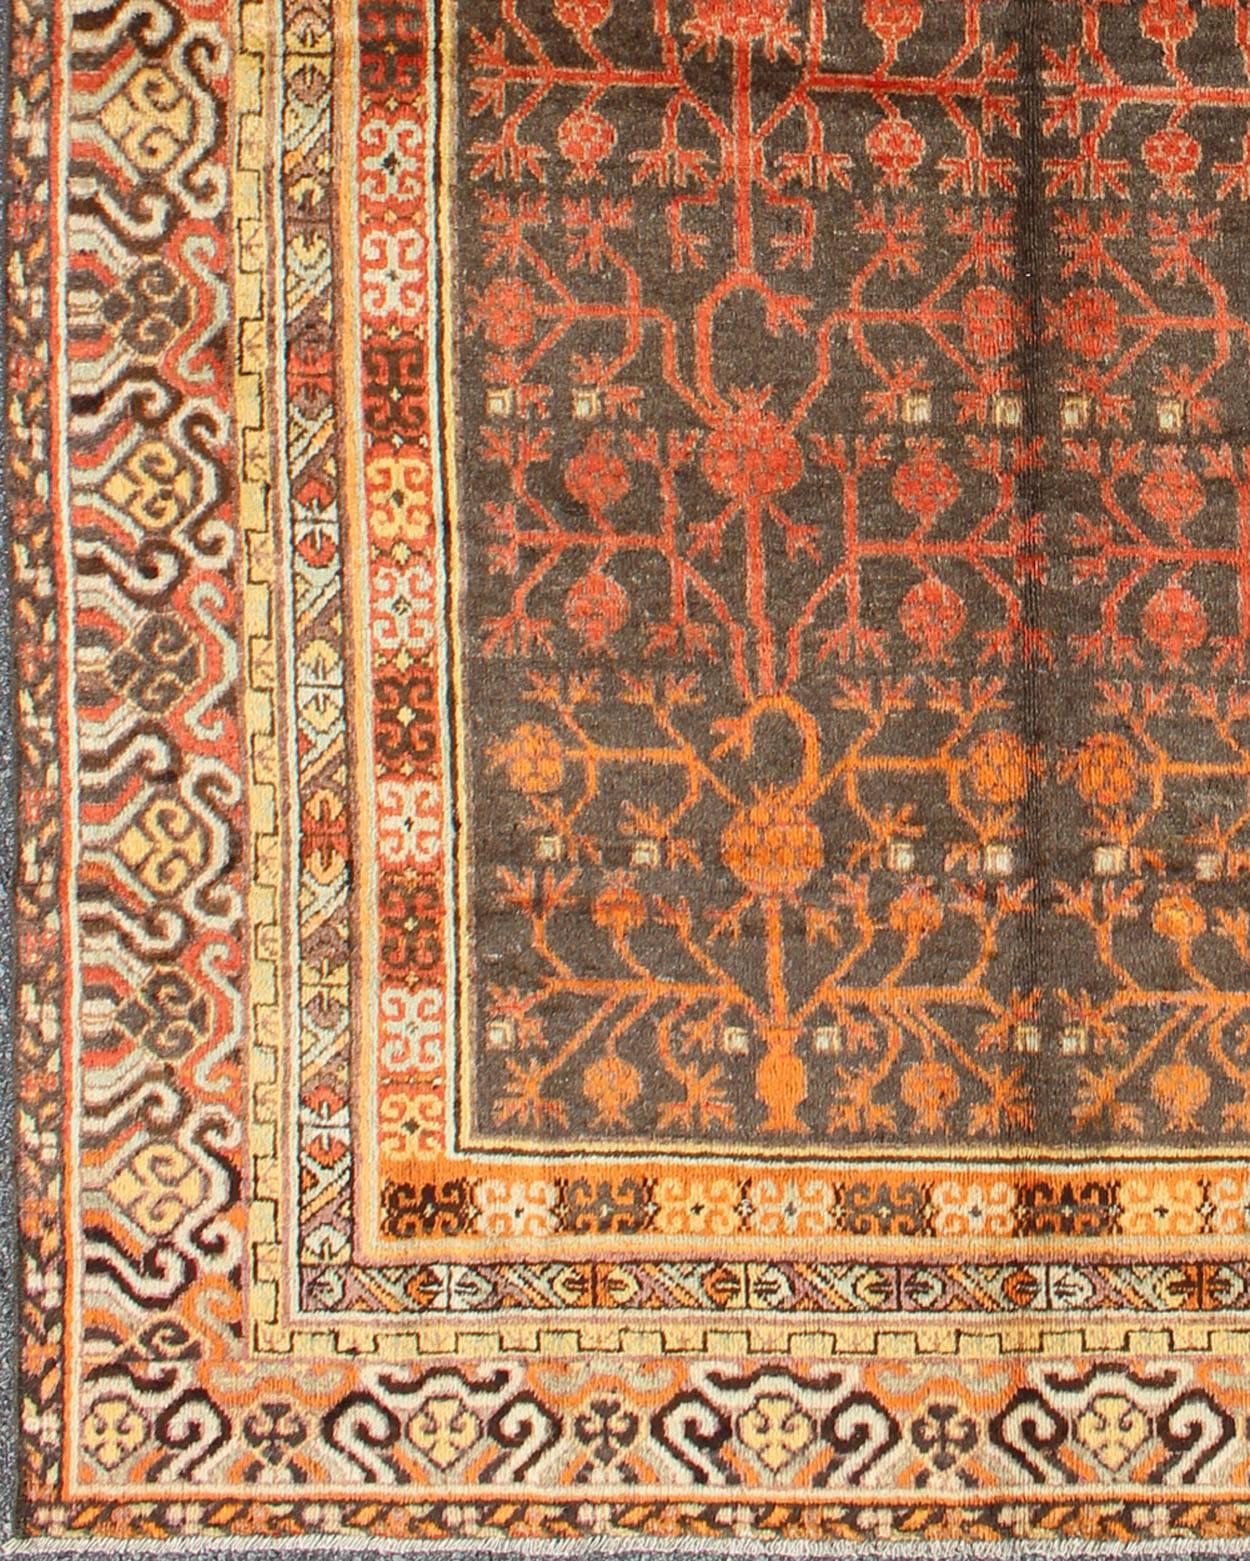 An antique, early 20th century, Central Asian Khotan rug with traditional all-over pomegranate pattern on a charcoal field surrounded by multiple complementary floral borders of gold and orange. 
Measures: 5'7 x 8'11.